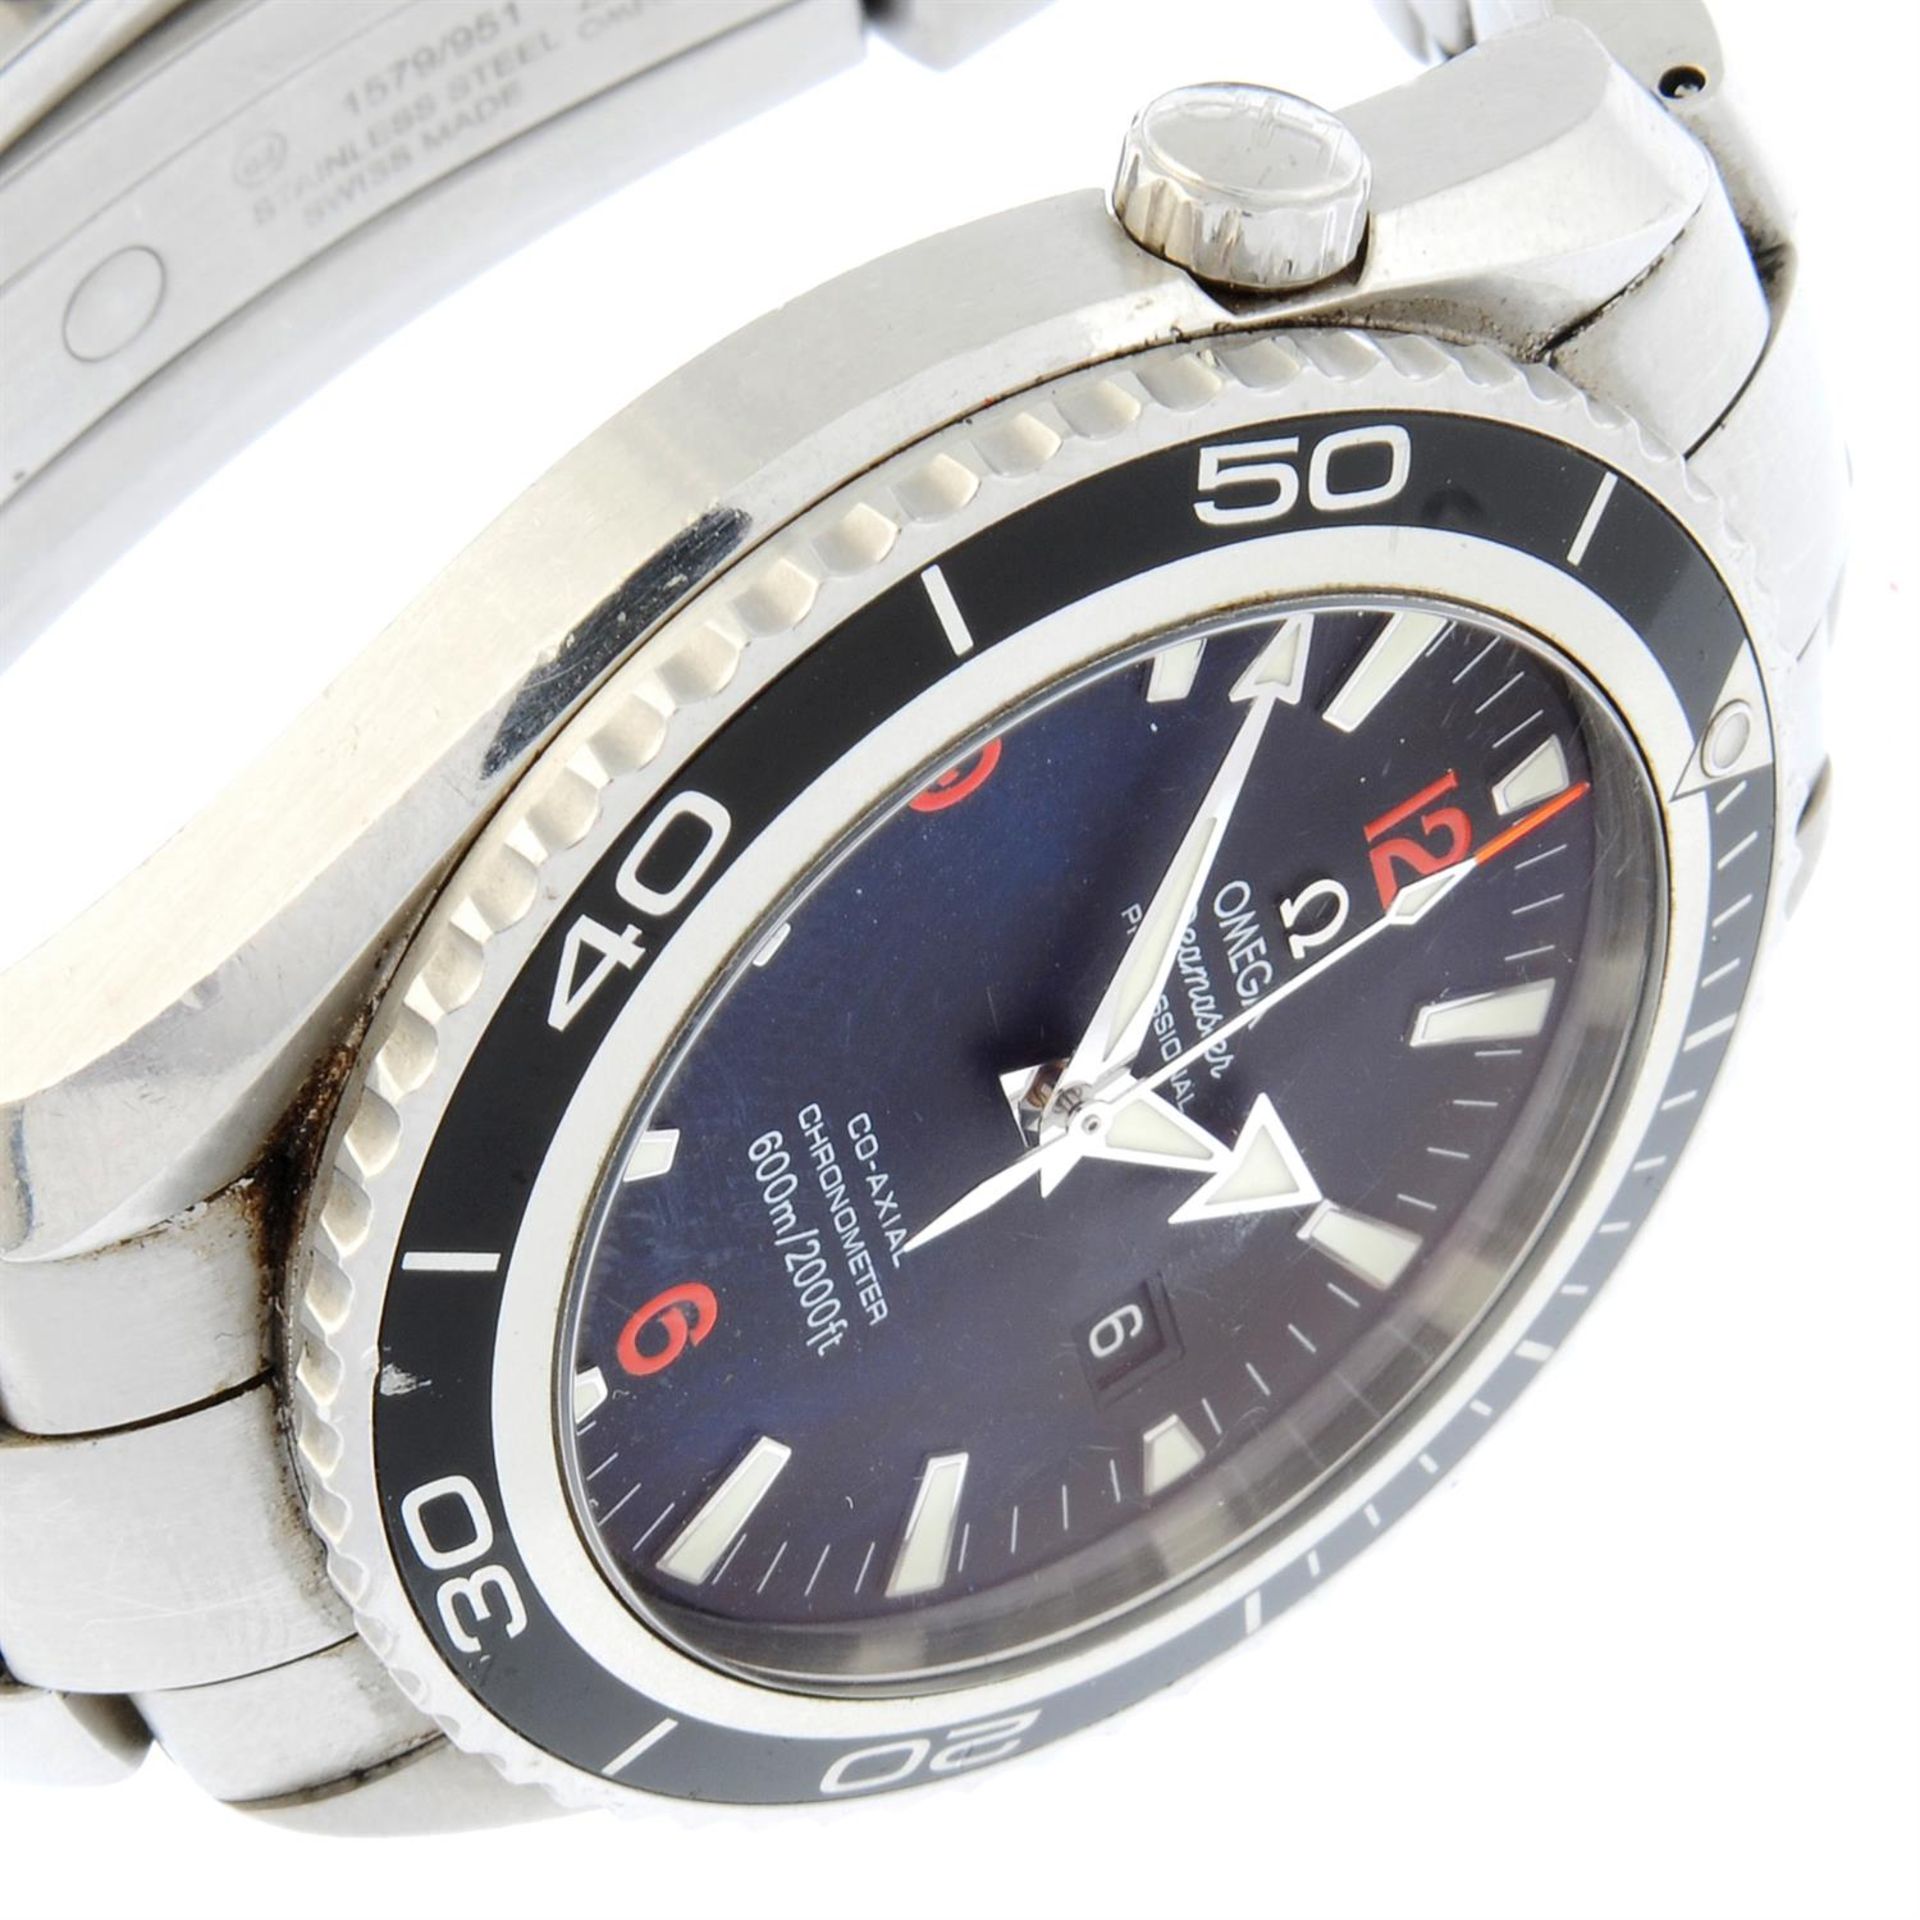 Omega - a Seamaster Planet Ocean watch, 45mm. - Image 4 of 6